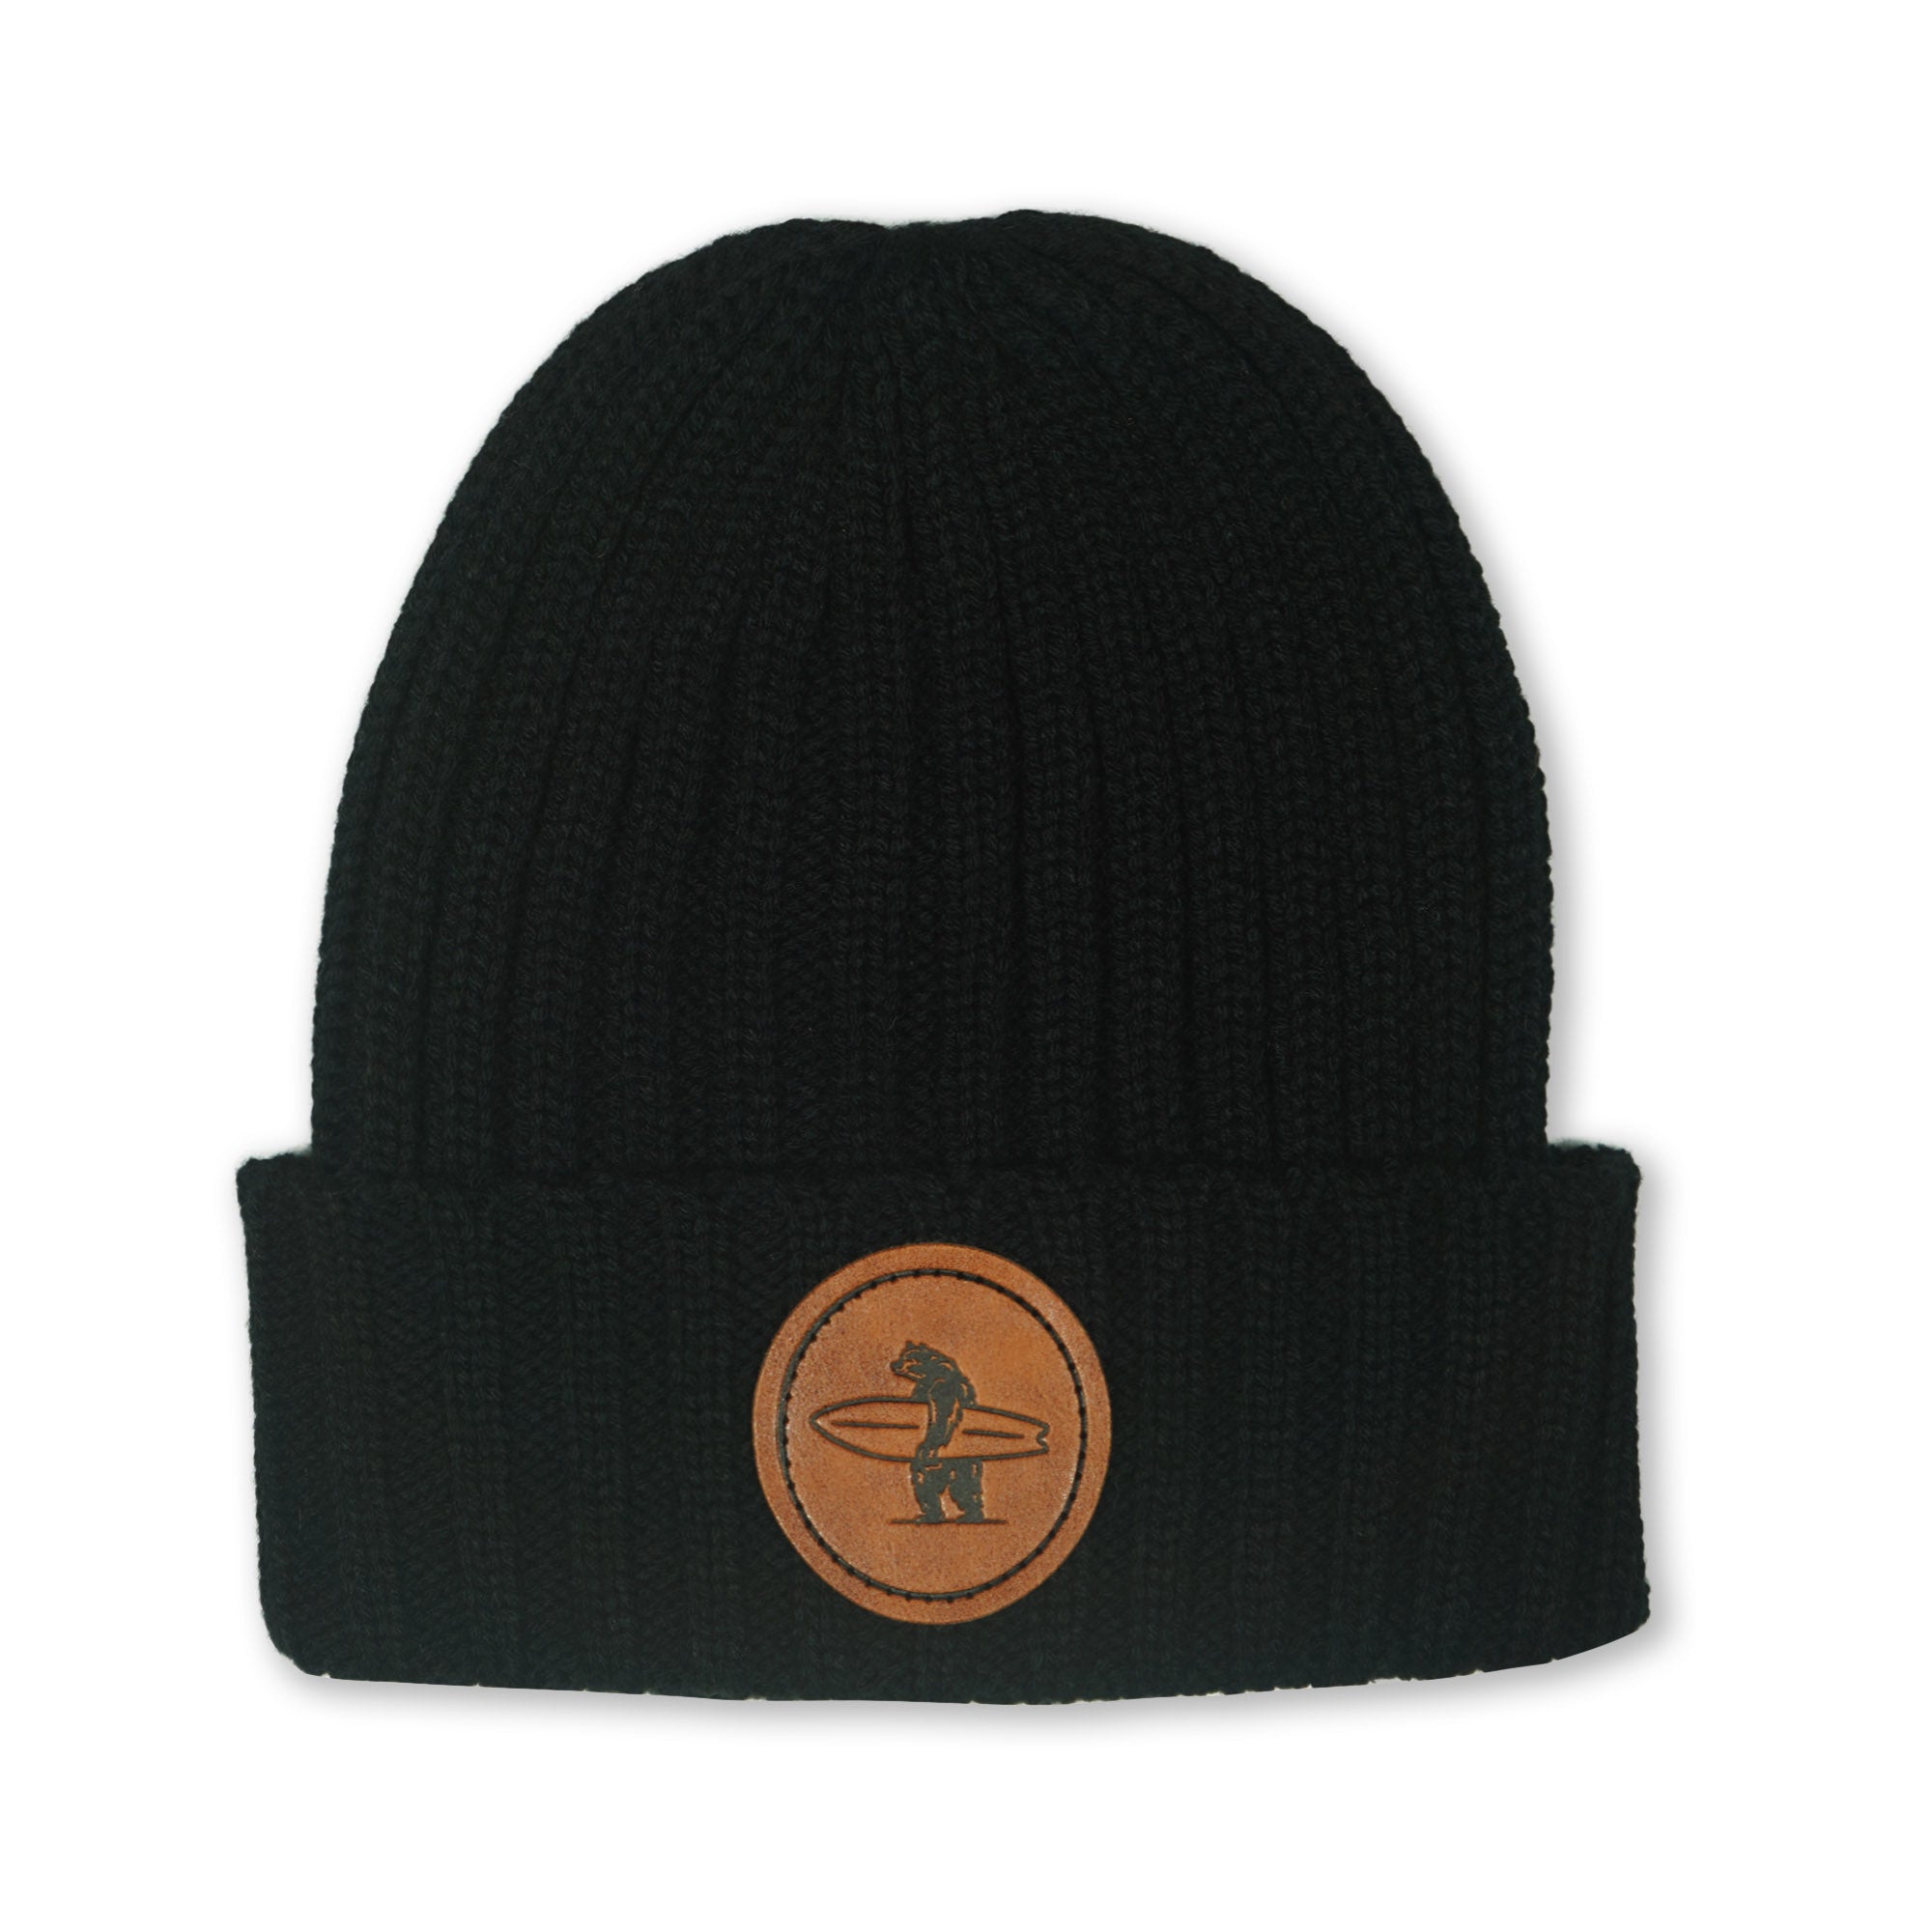 Black Pismo Beanie by Everyday California with vegan leather patch